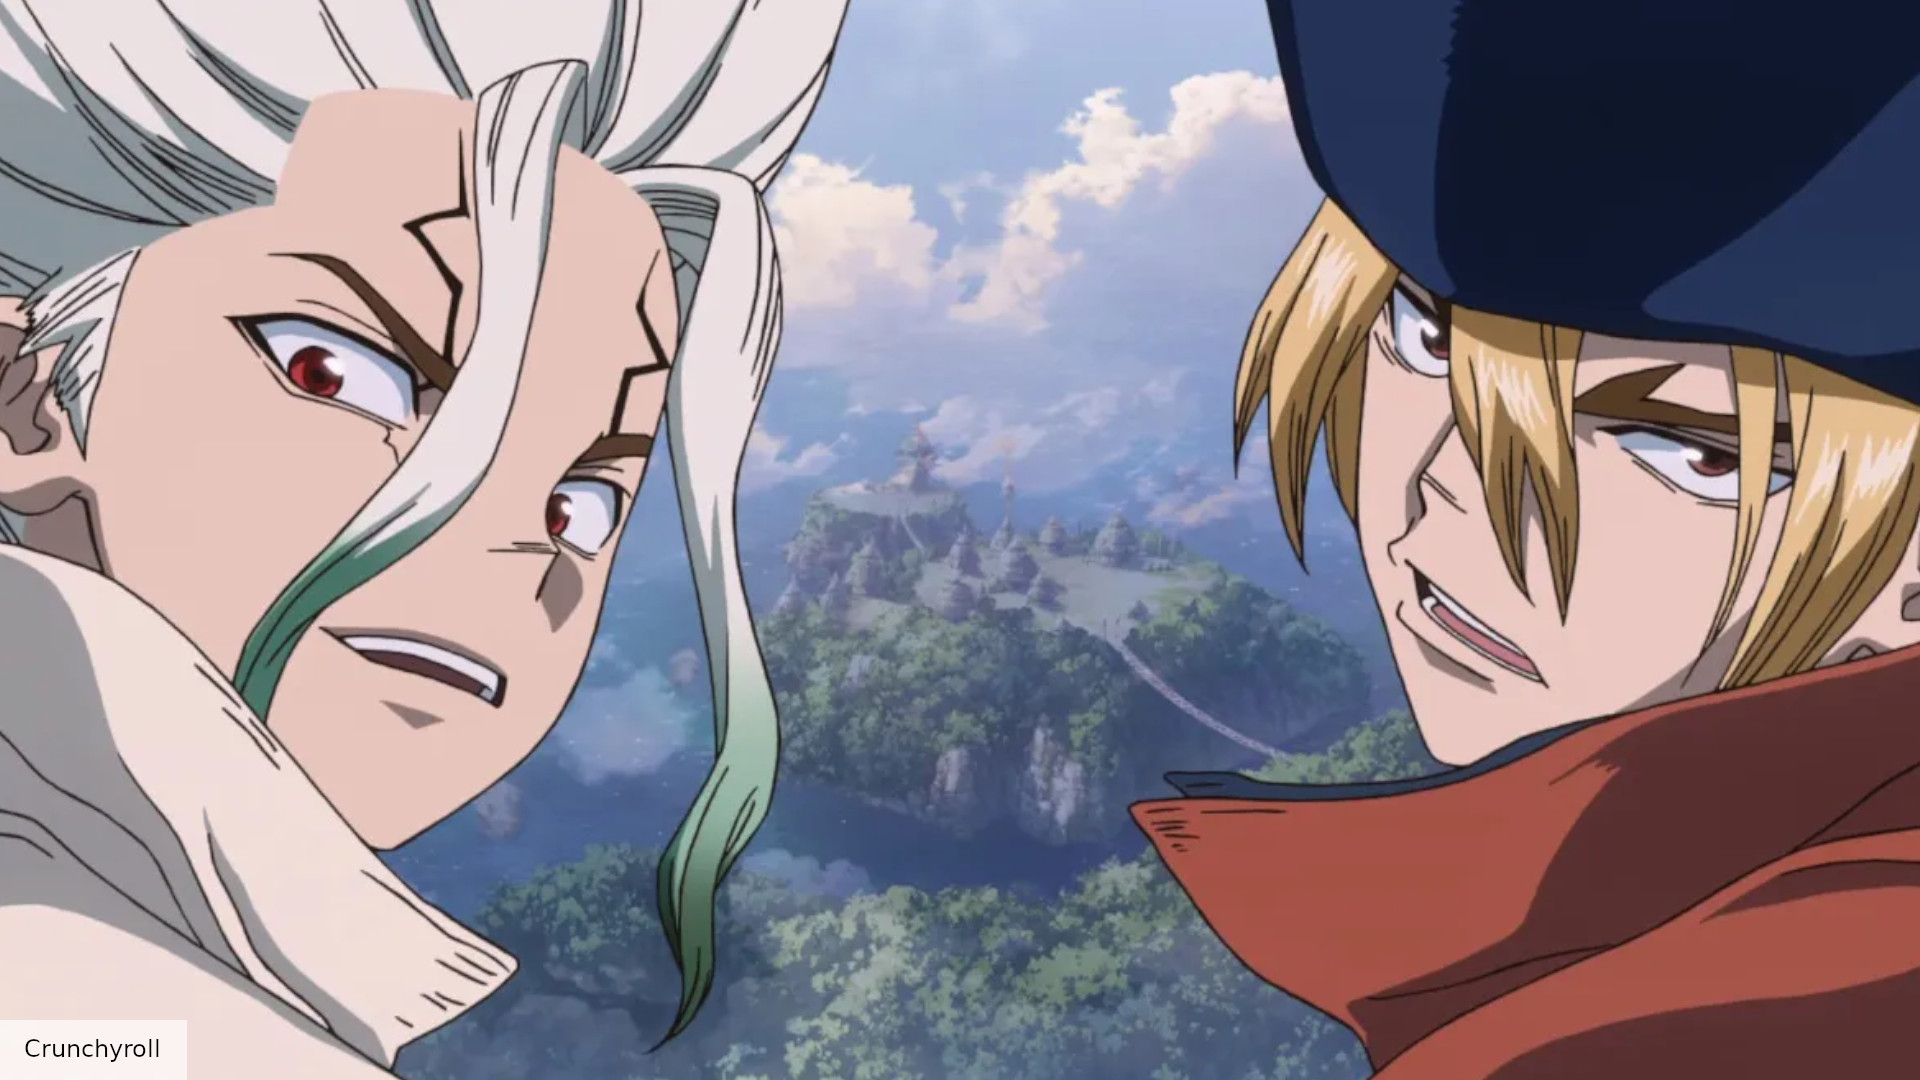 Dr. Stone Releases Season 3 Trailer: Watch